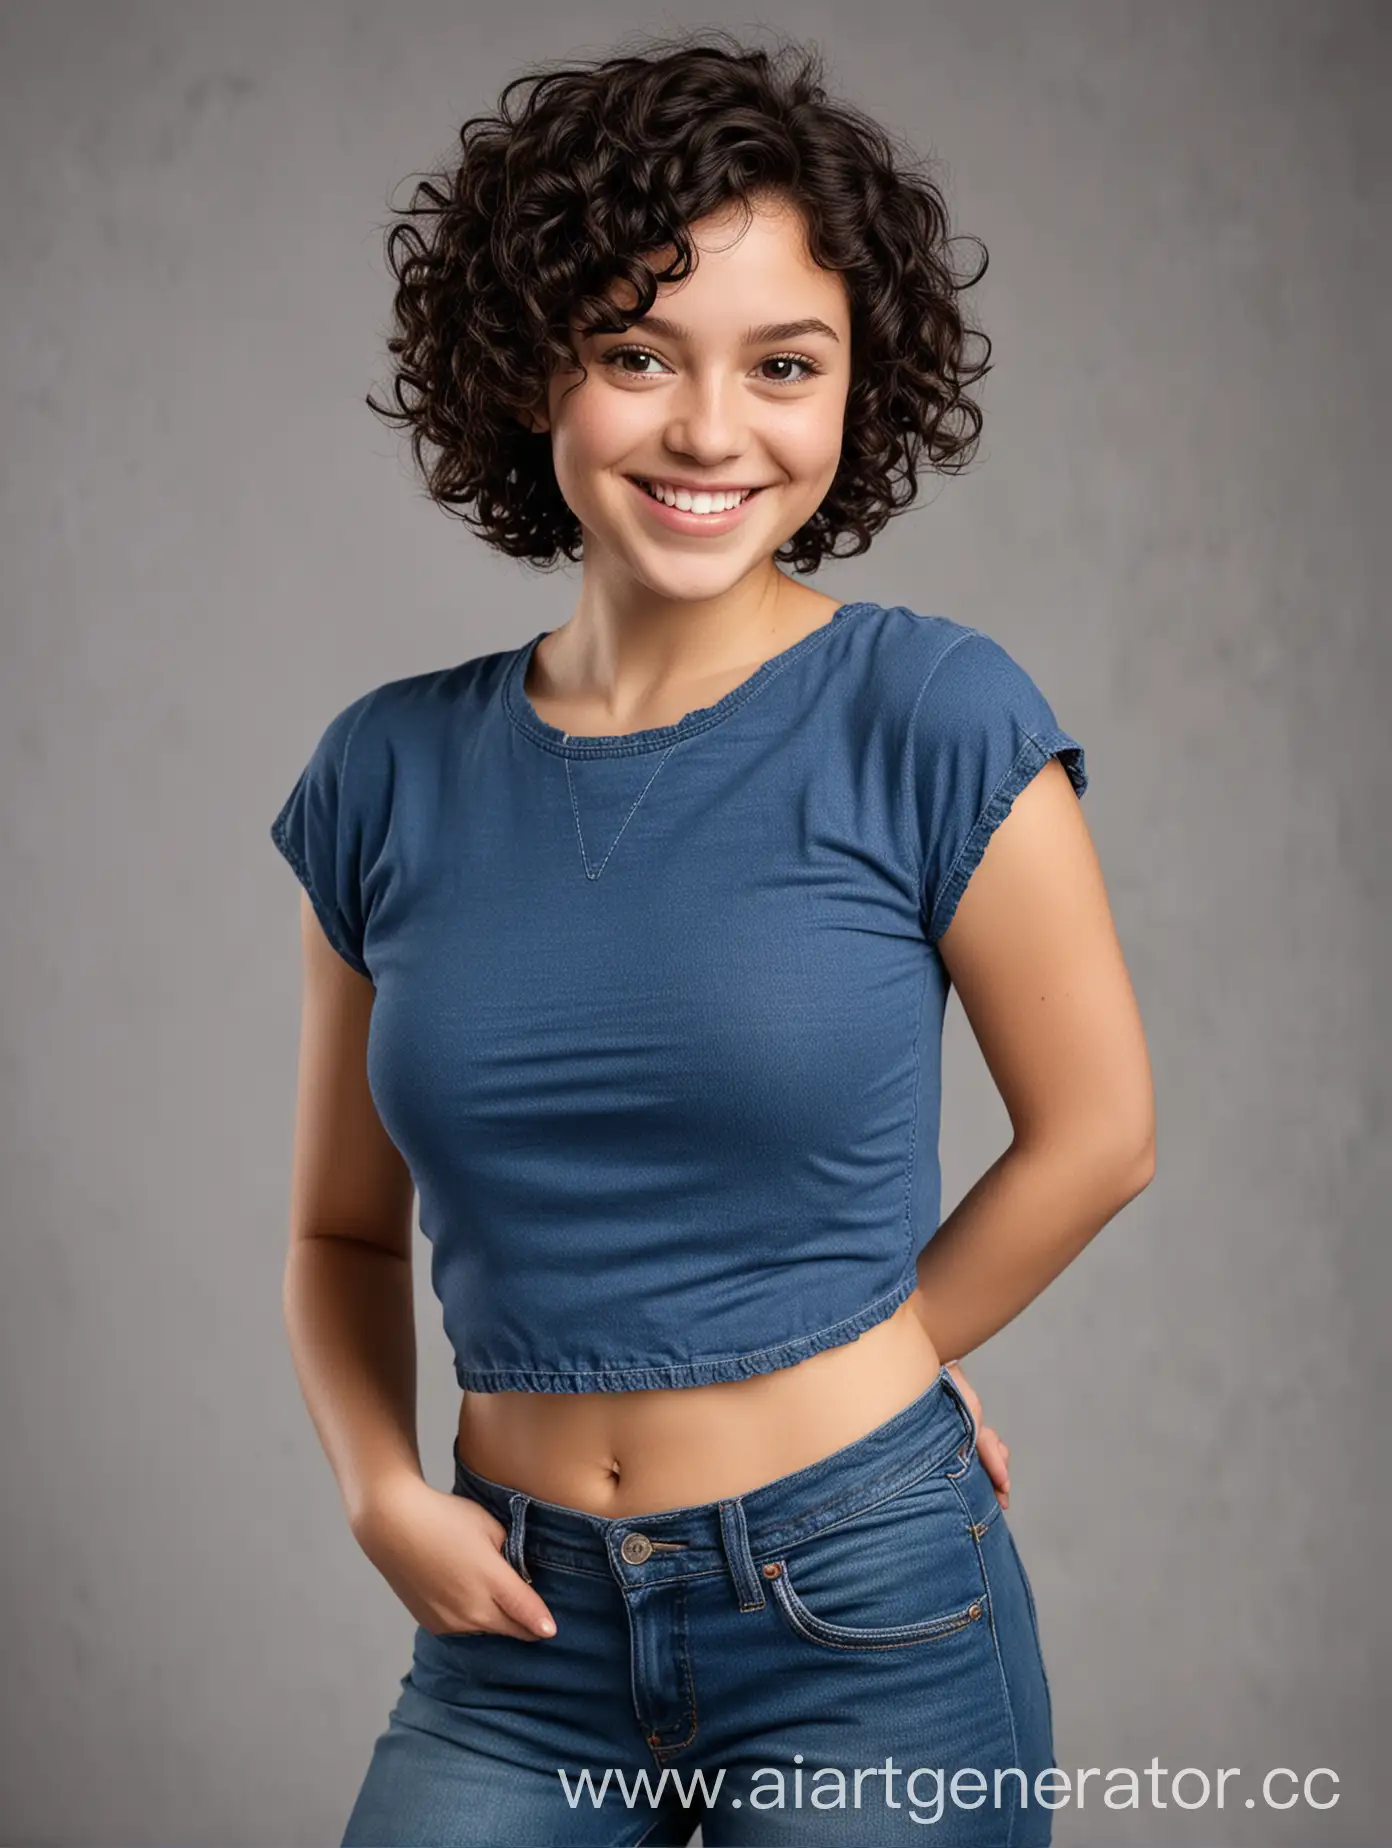 Sweet-Smiling-Short-Girl-with-Dark-Curly-Hair-in-Blue-Top-and-Jeans